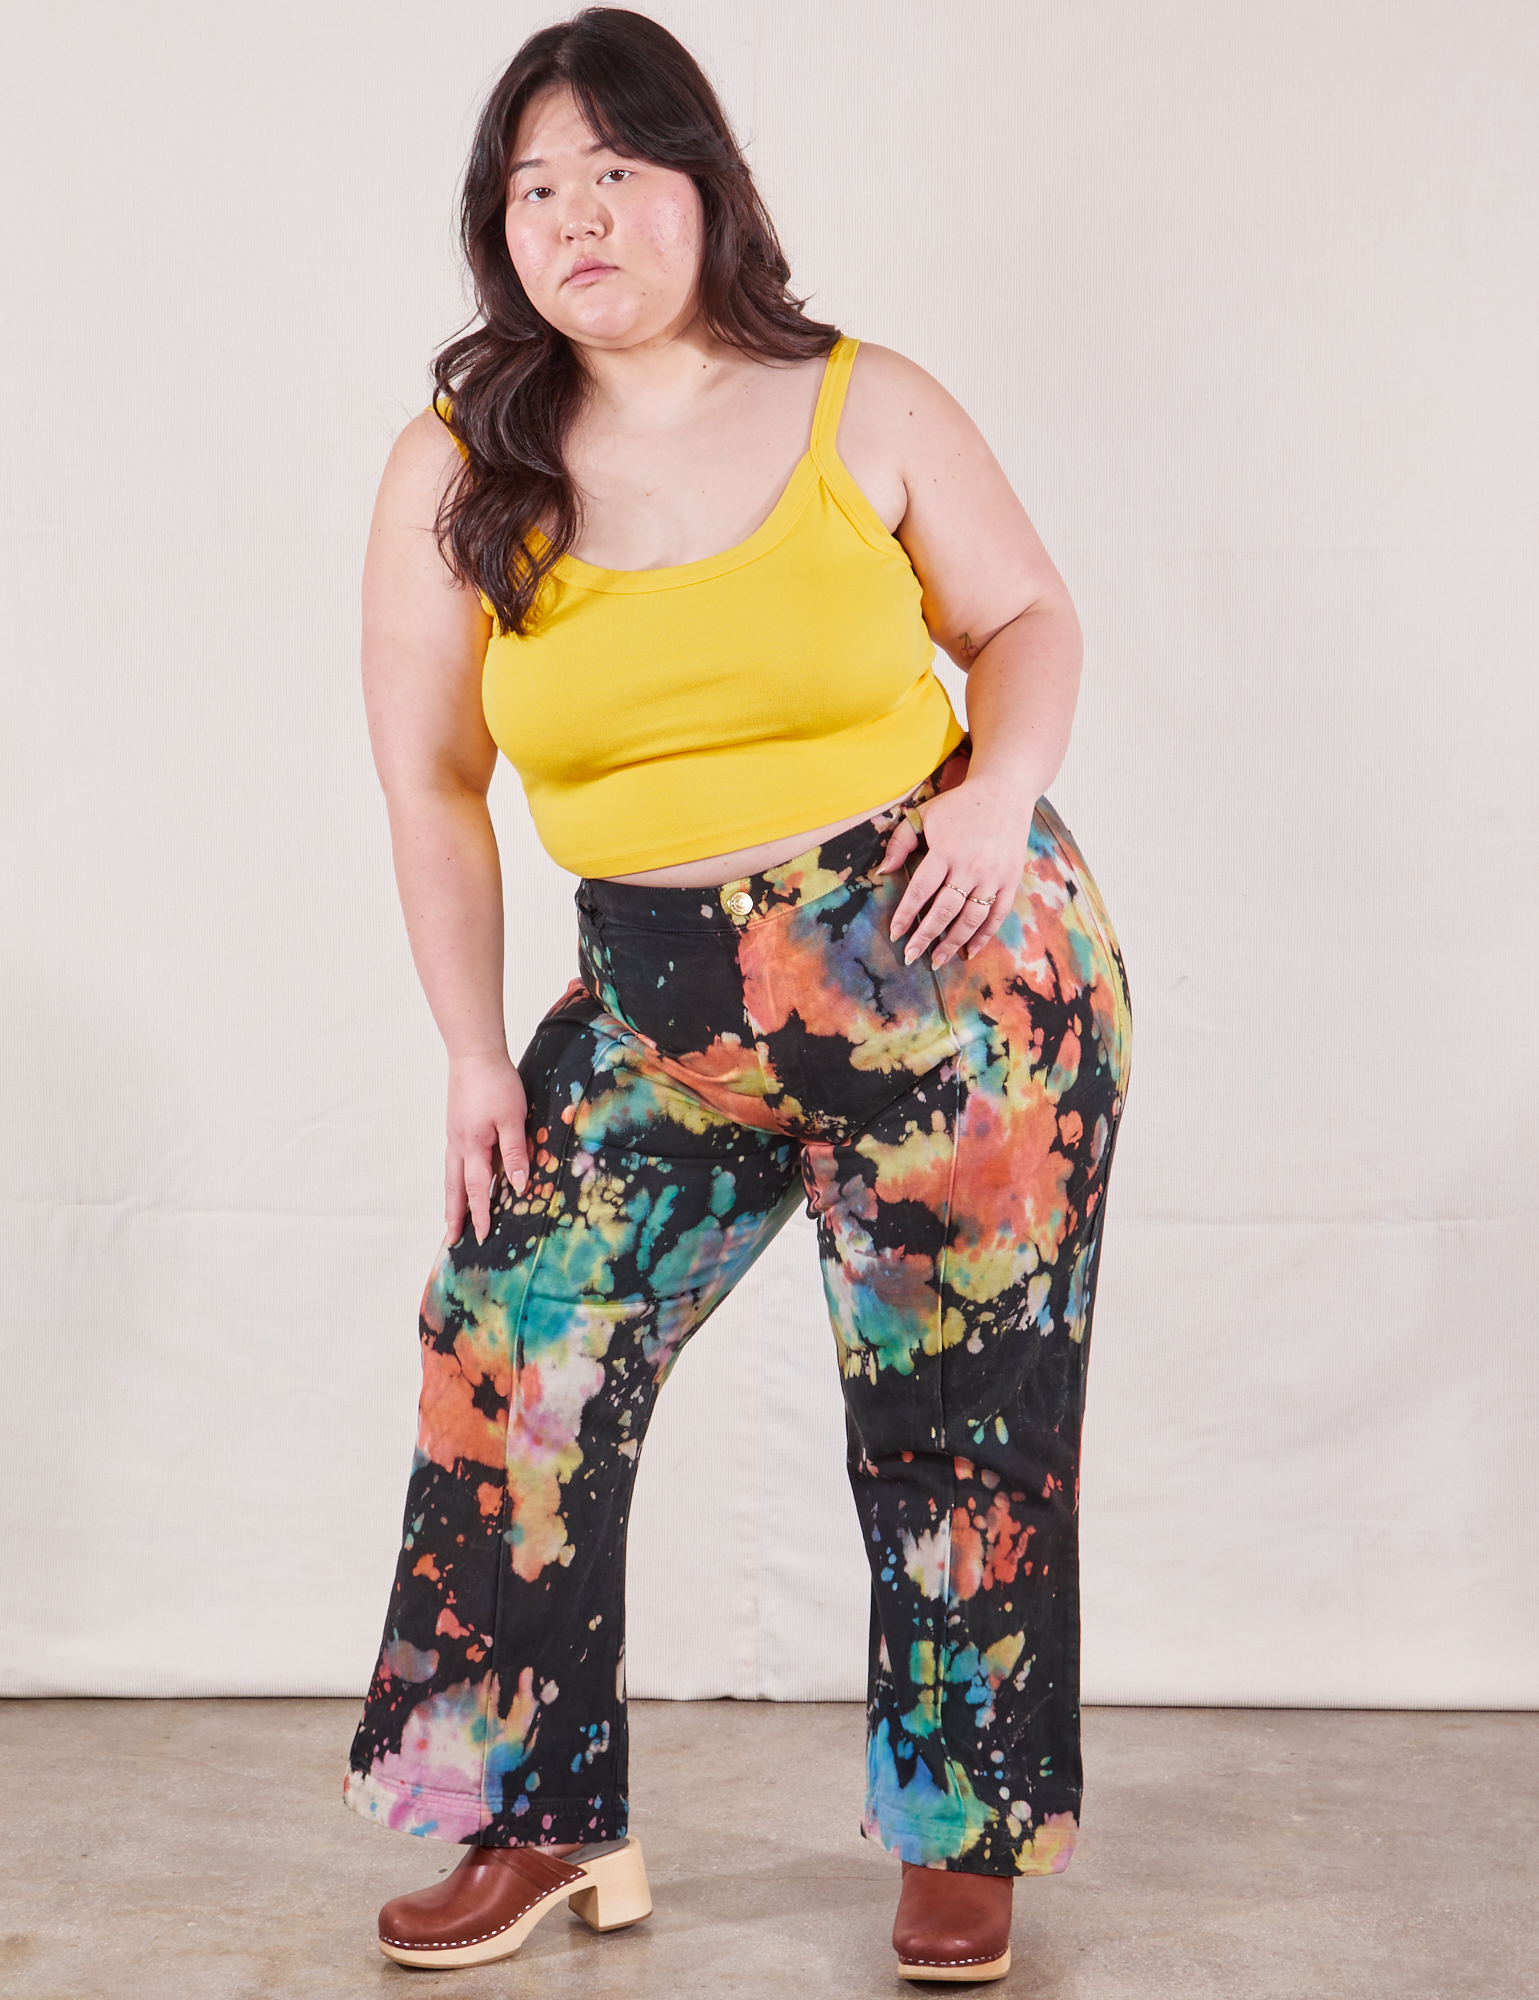 Ashley is 5&#39;7&quot; and wearing 1XL Western Pants in Rainbow Magic Waters paired with sunshine yellow Cami